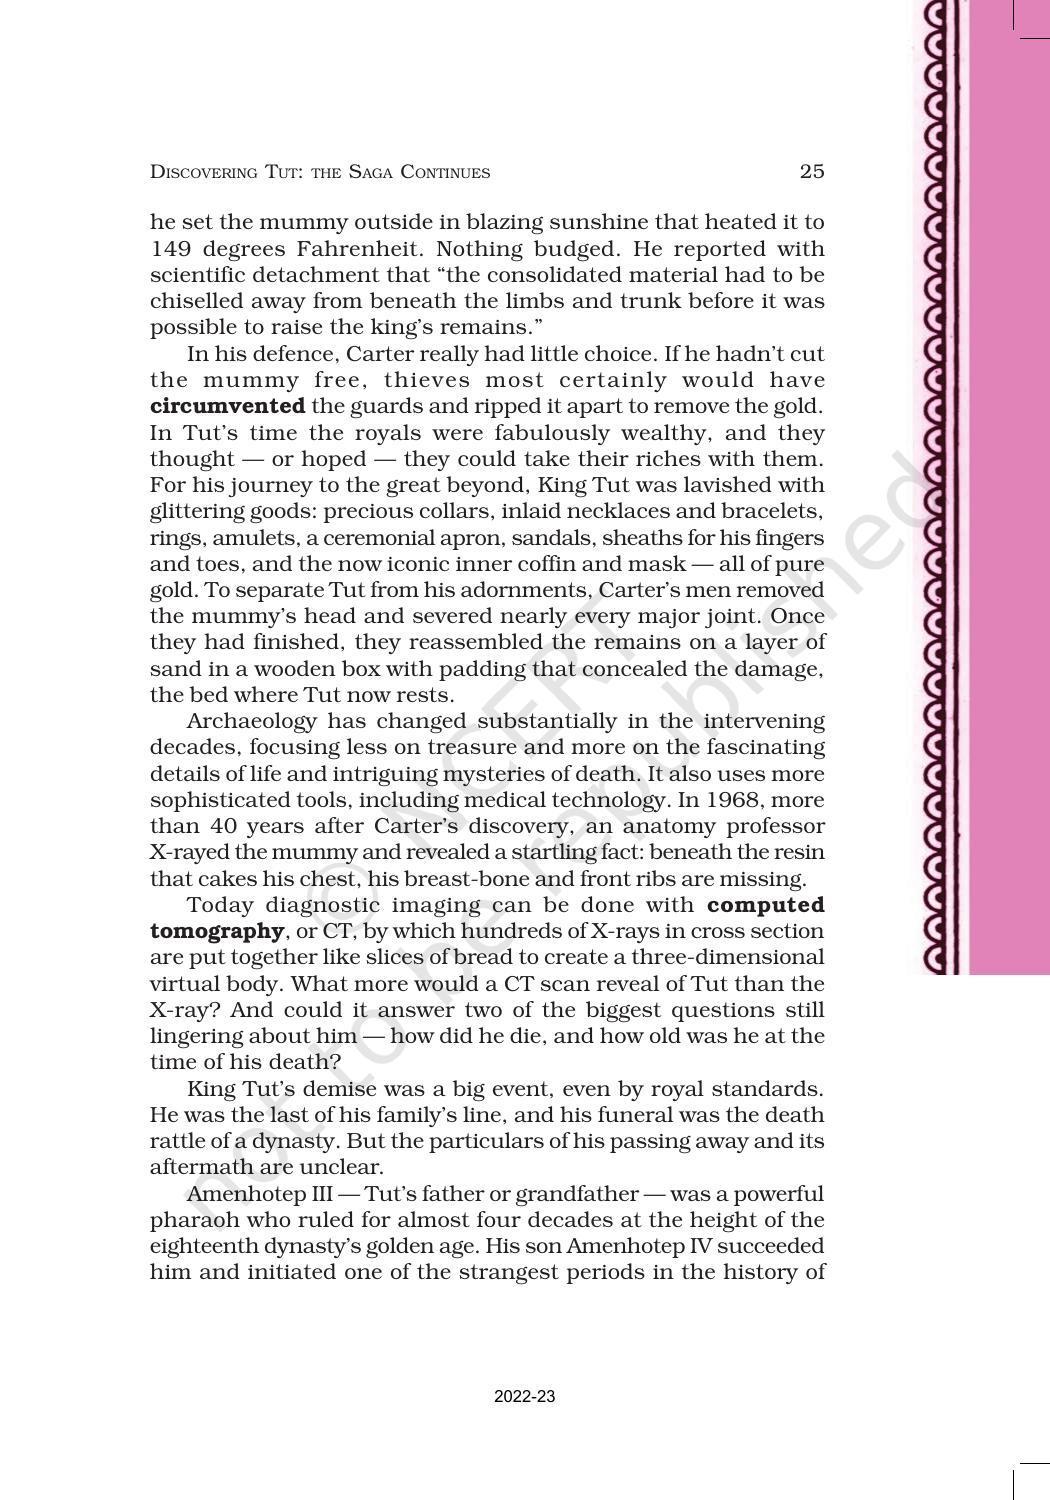 NCERT Book for Class 11 English Hornbill Chapter 3 Discovering Tut: The Saga Continues - Page 4